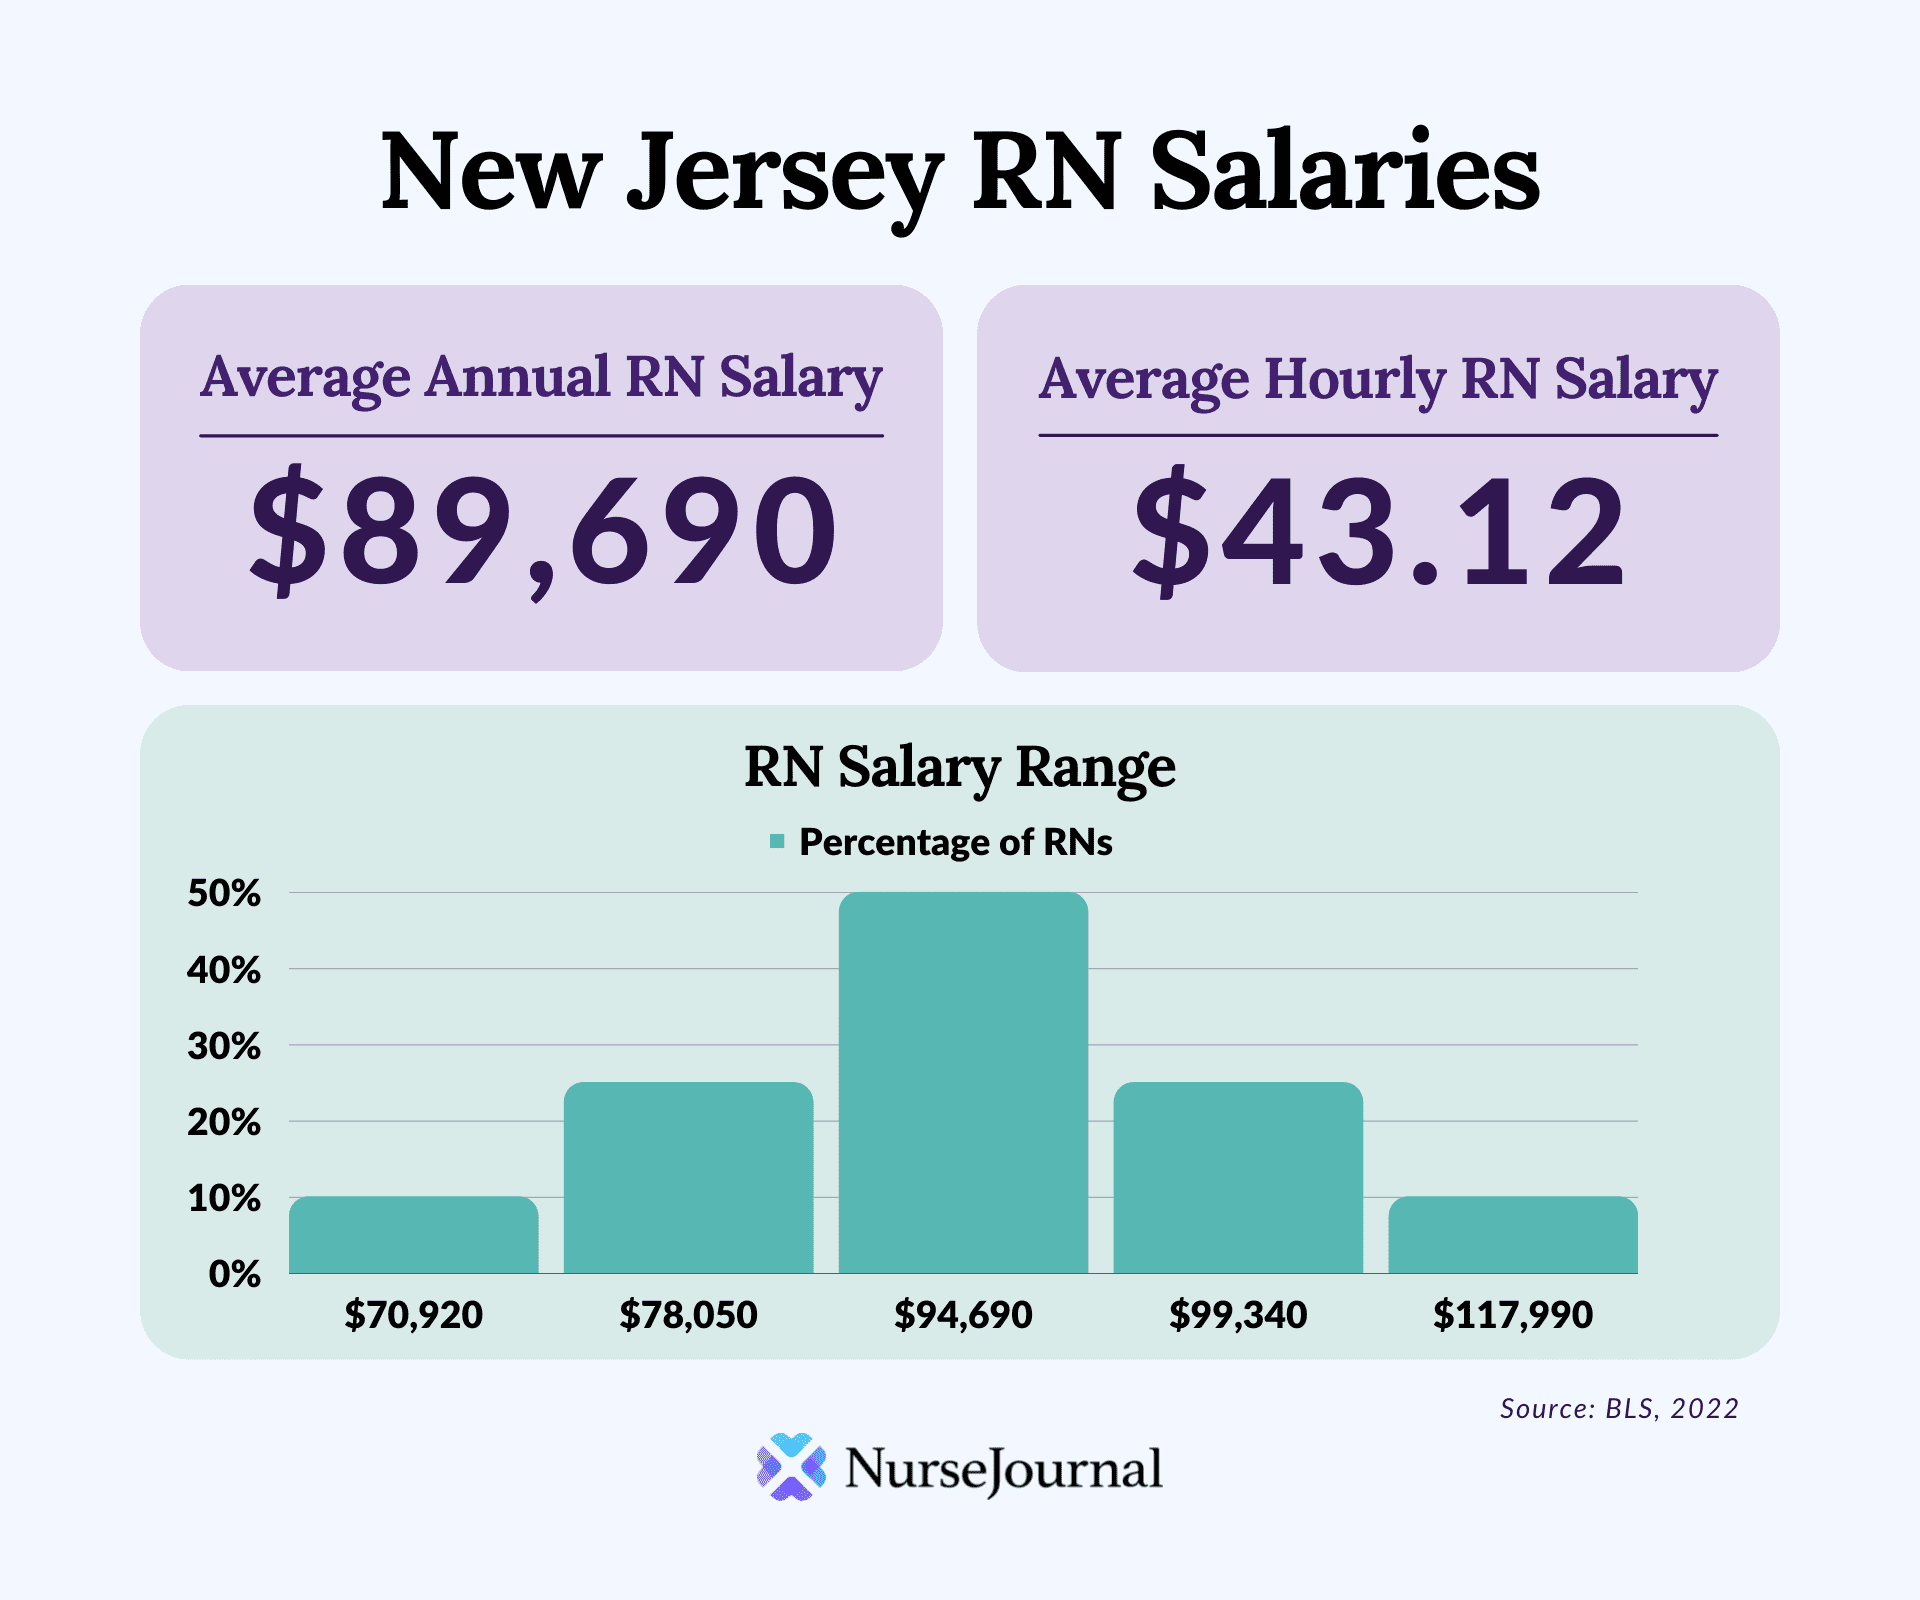 Infographic of registered nursing salary data in New Jersey. The average annual RN salary is 89690. The average hourly RN salary is 43.12. Average RN salaries range from 70920 among the bottom 10th percentile of earners to 117990 among the top 90th percentile of earners.